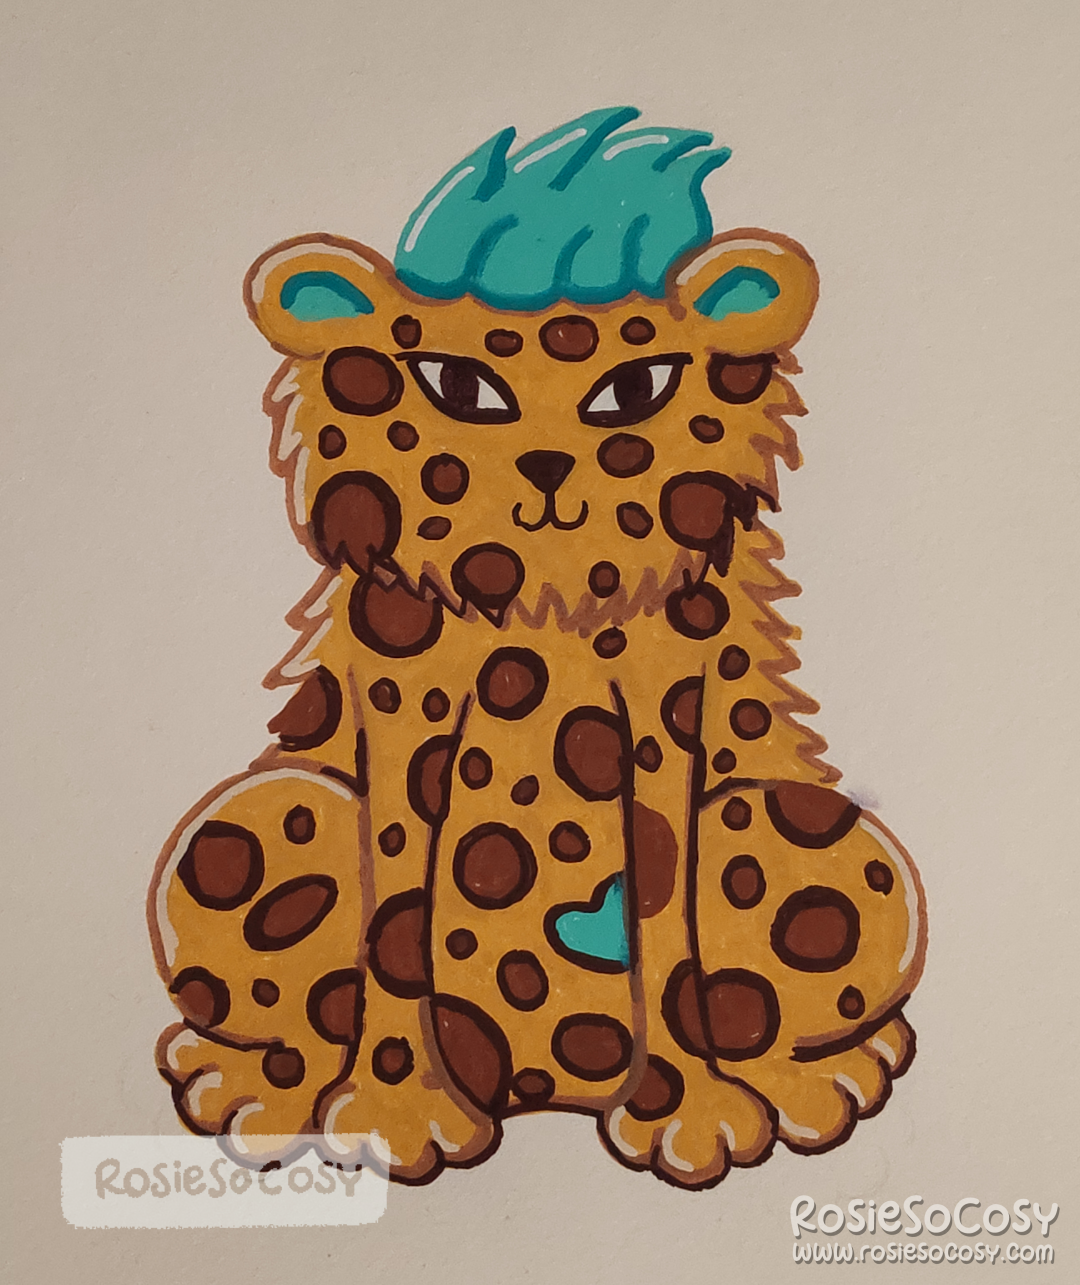 Illustration of an ochre leopard with brown spots and teal accents.